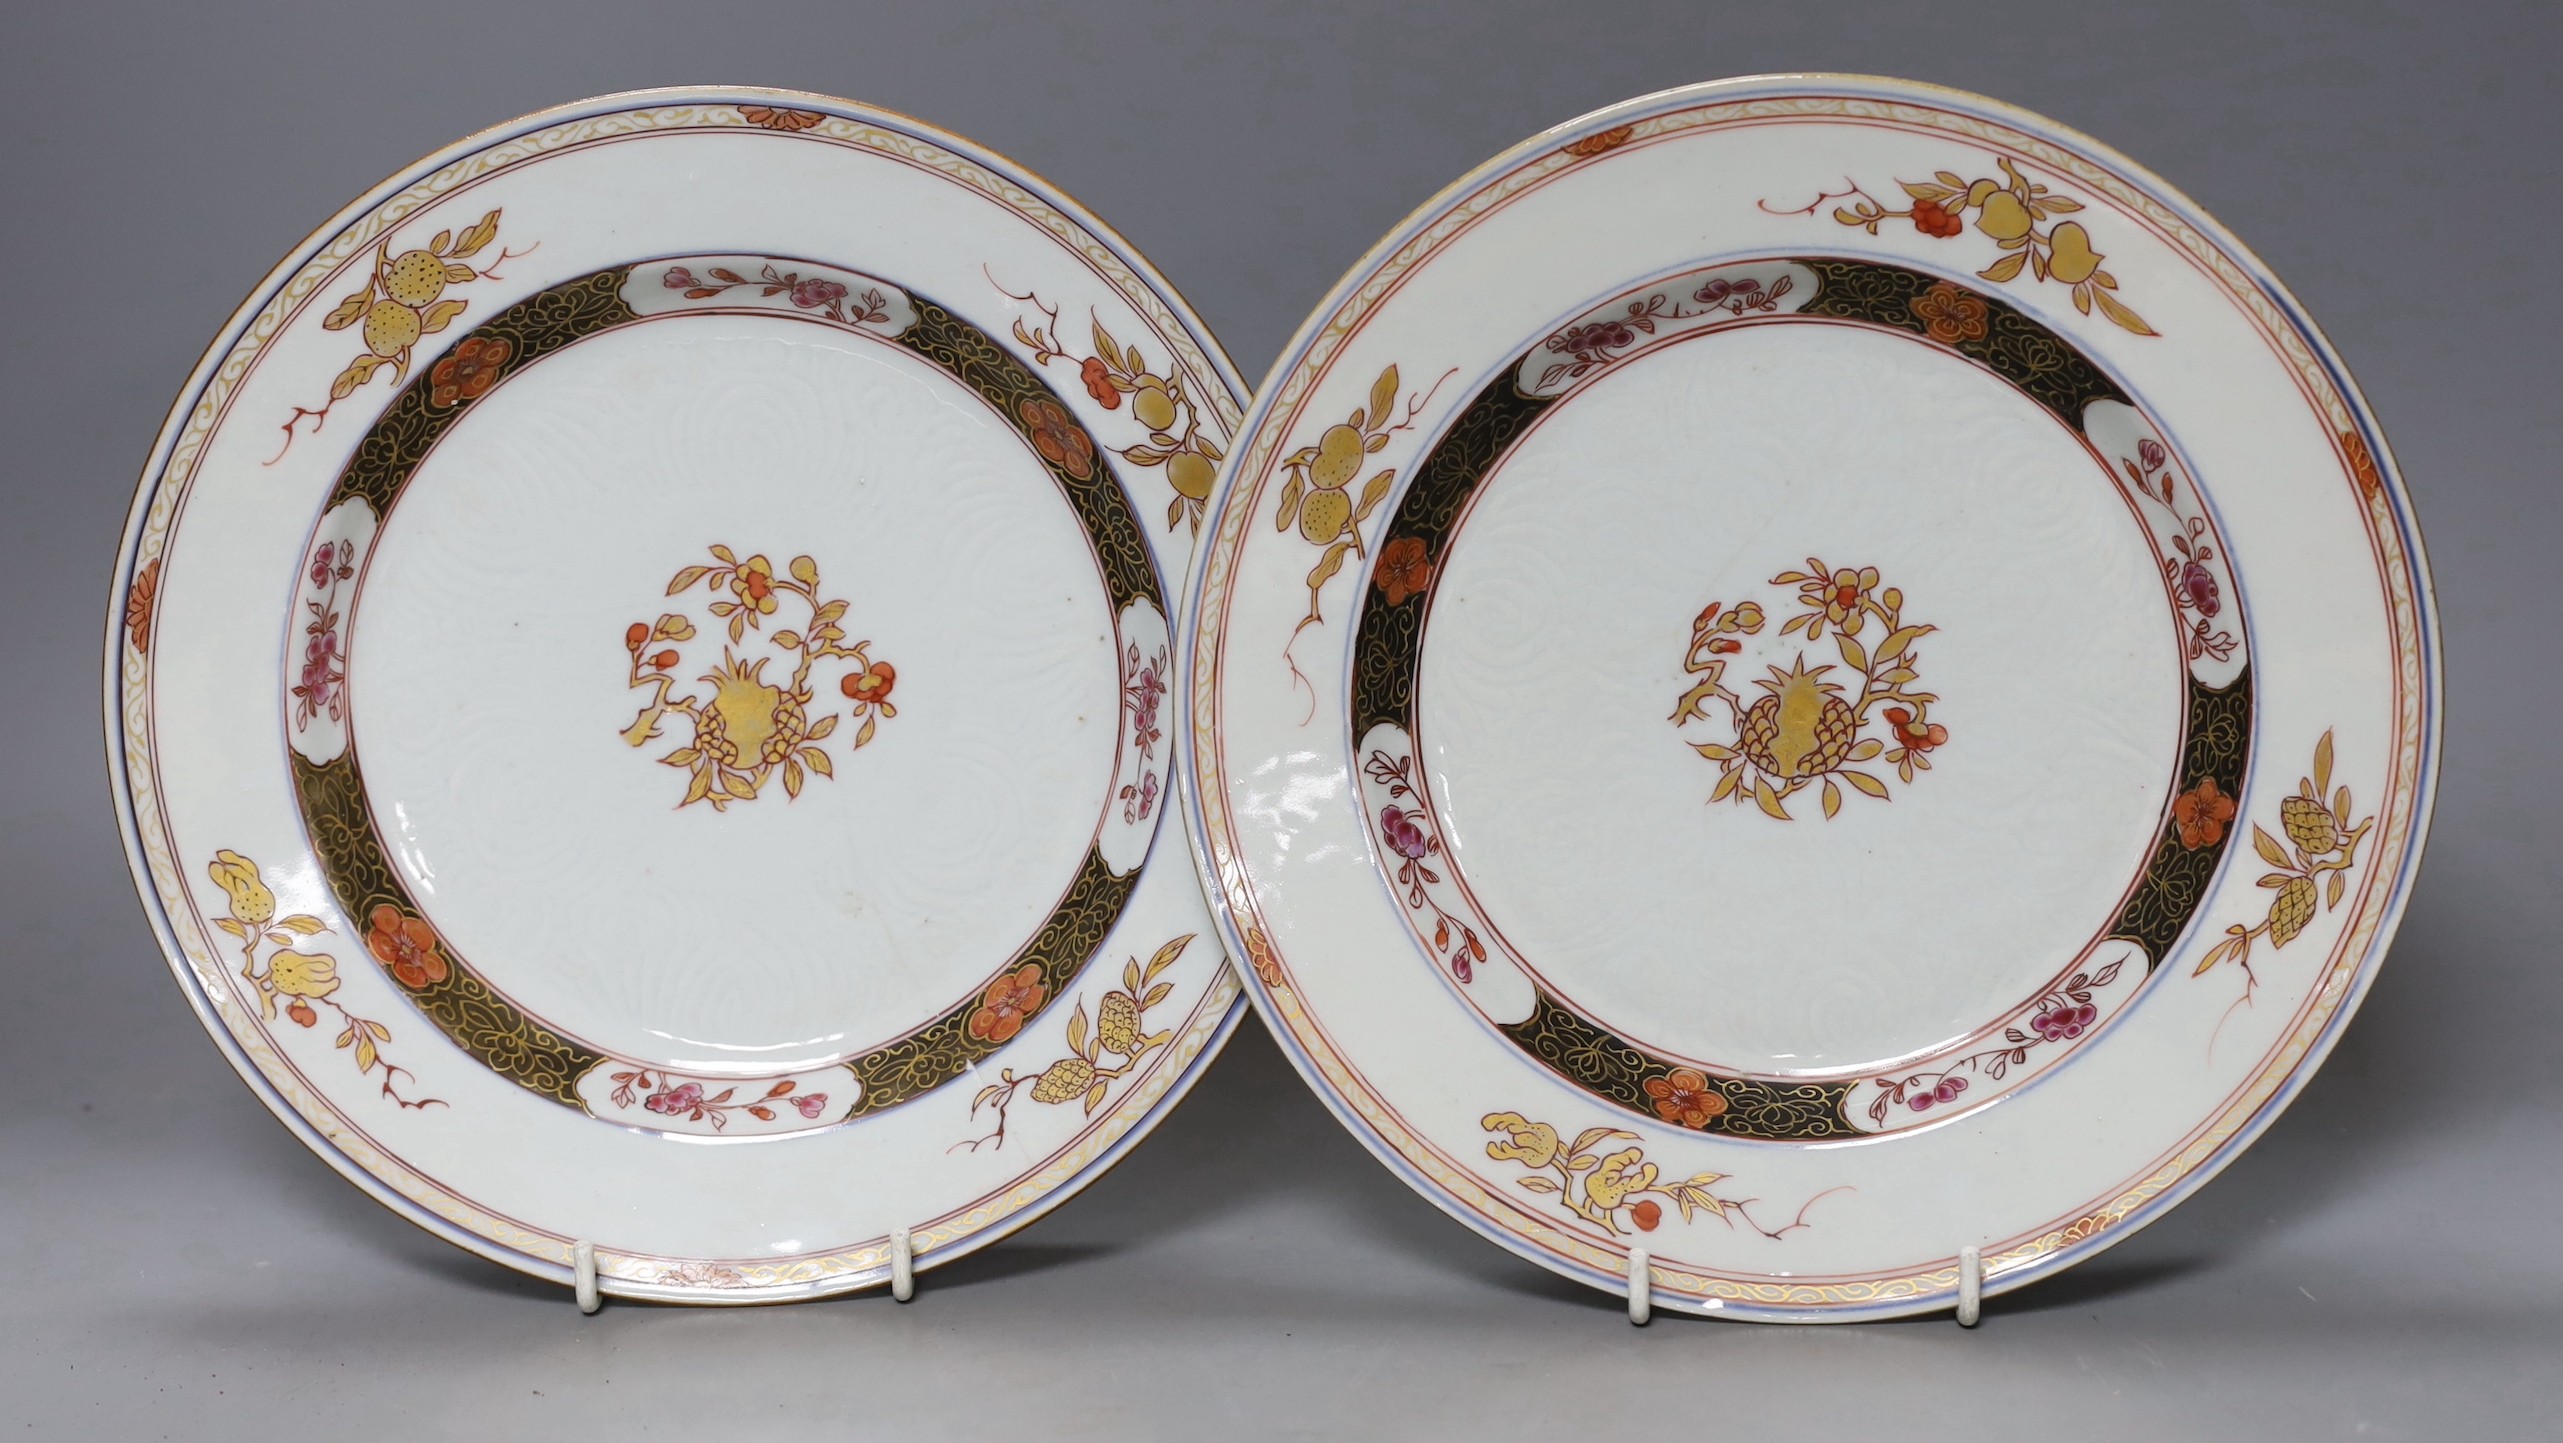 A pair of 18th century Chinese export plates, Yongzheng period, 22cm